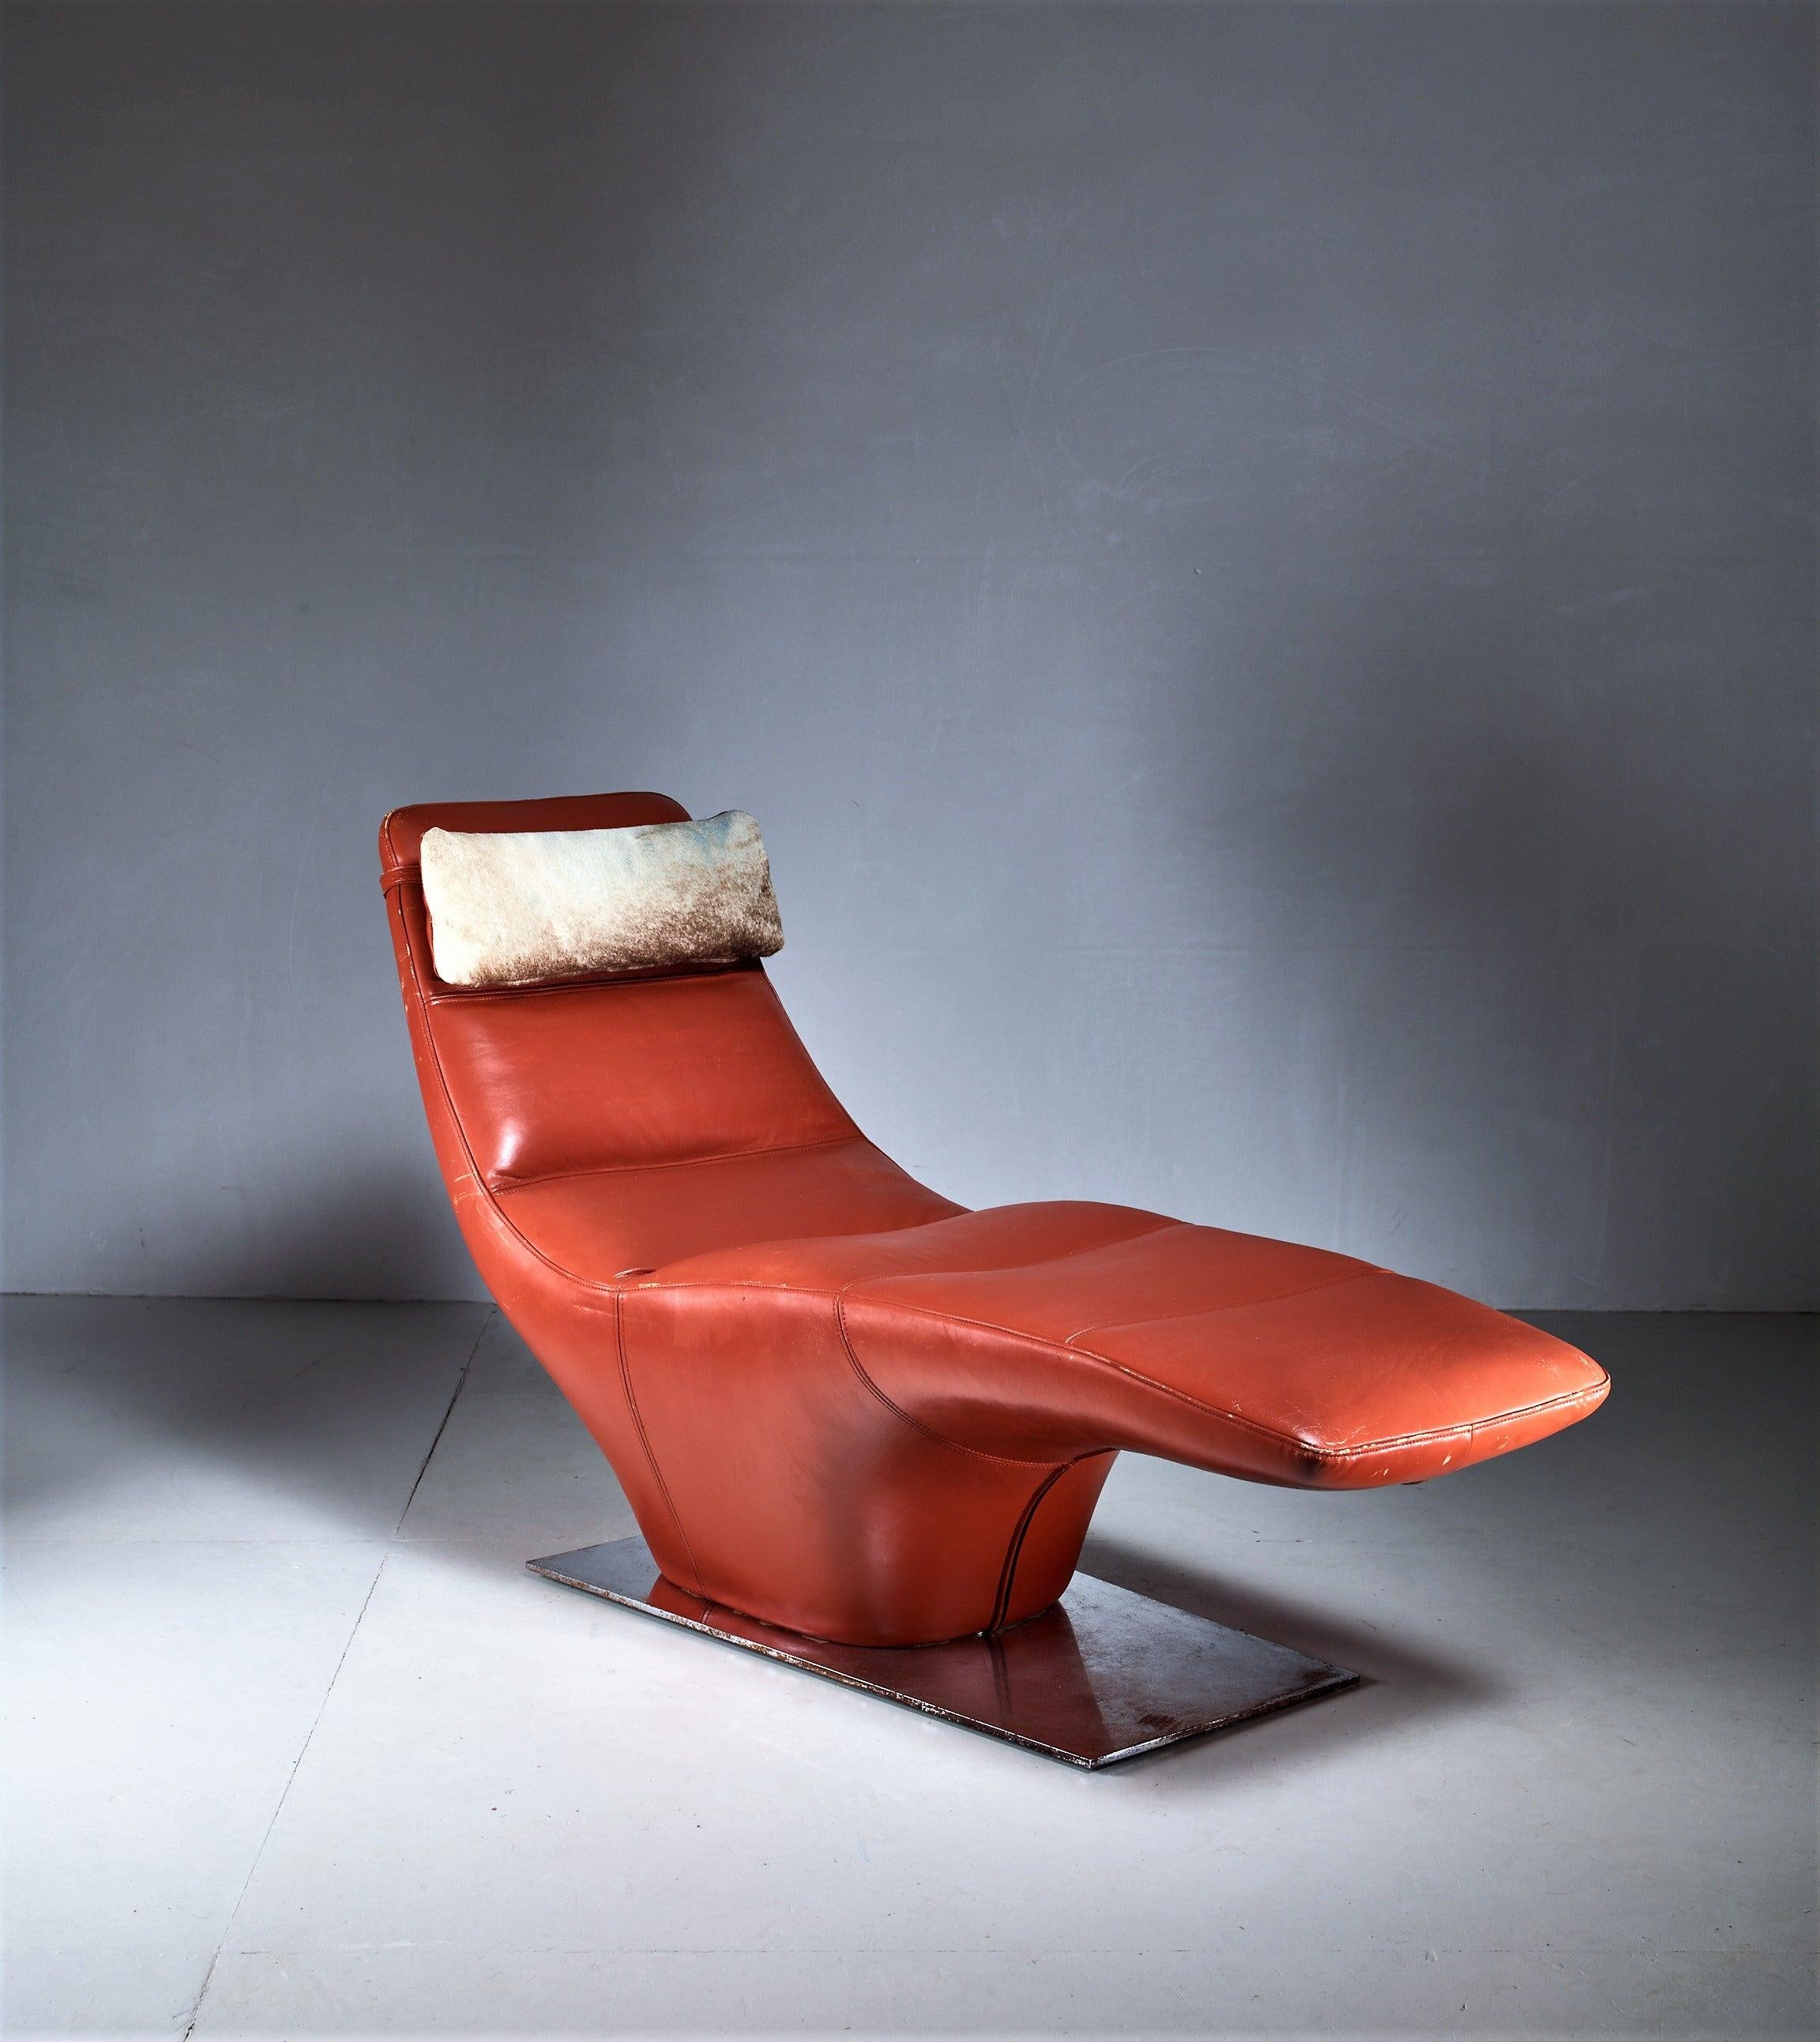 A Mid-Century American chaise longue standing on a stainless steel base. The chair has a light brown leather upholstery and has a removable partly cowhide pillow.